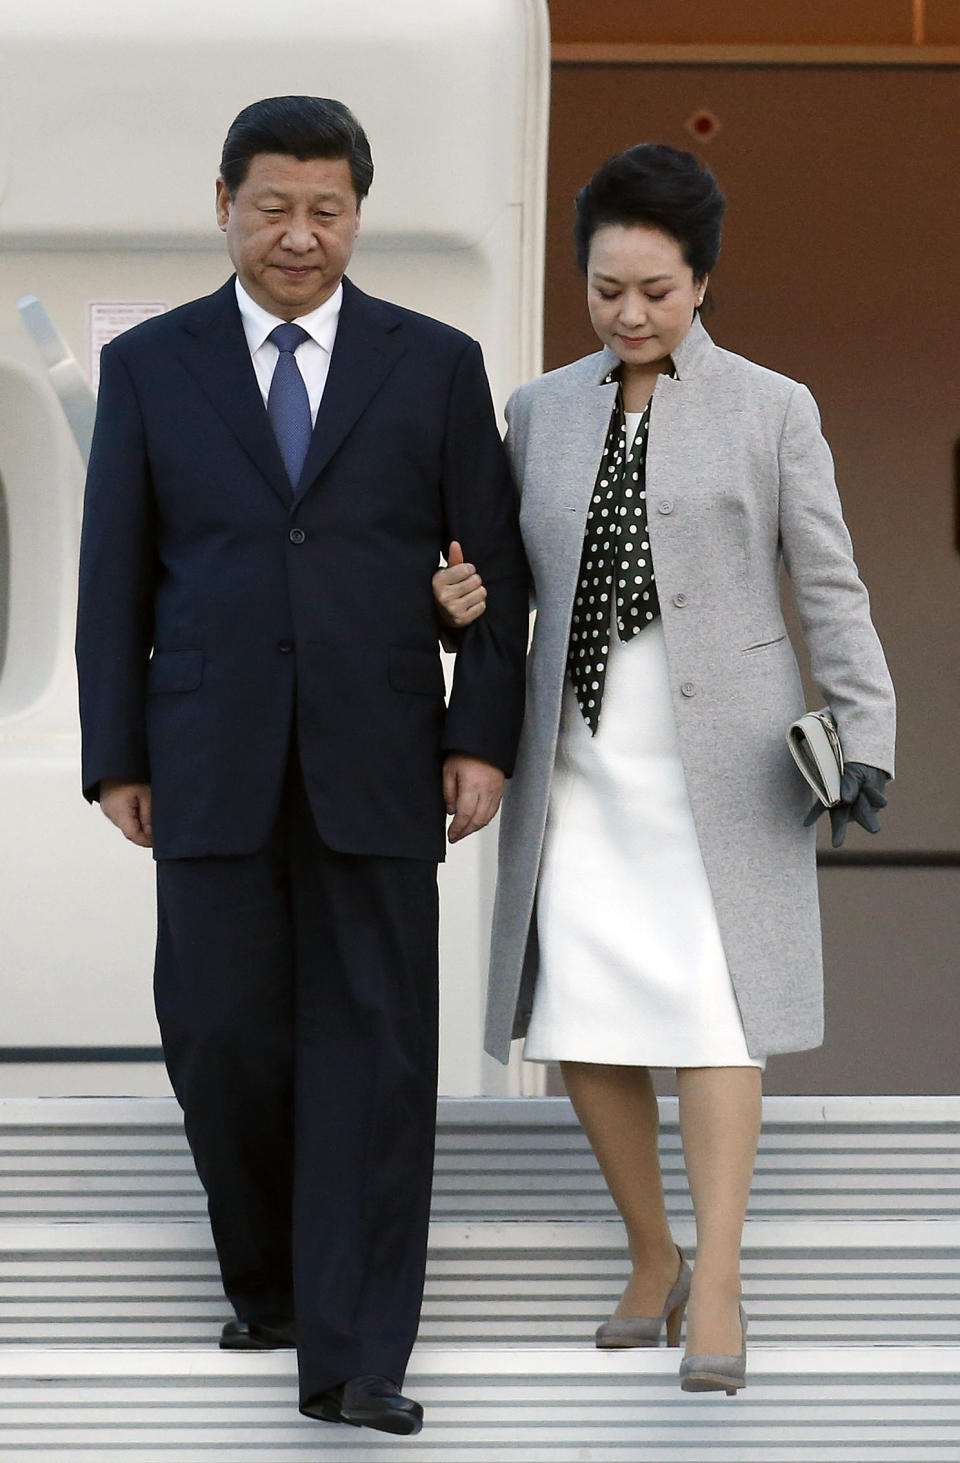 Chinese President Xi Jinping and his wife Peng Liyuan arrive at Lyon airport, central France, Tuesday, March 25, 2014. Xi will later have a dinner at the Lyon town-hall and has arrived in France for a three-day state visit. (AP Photo/Str)